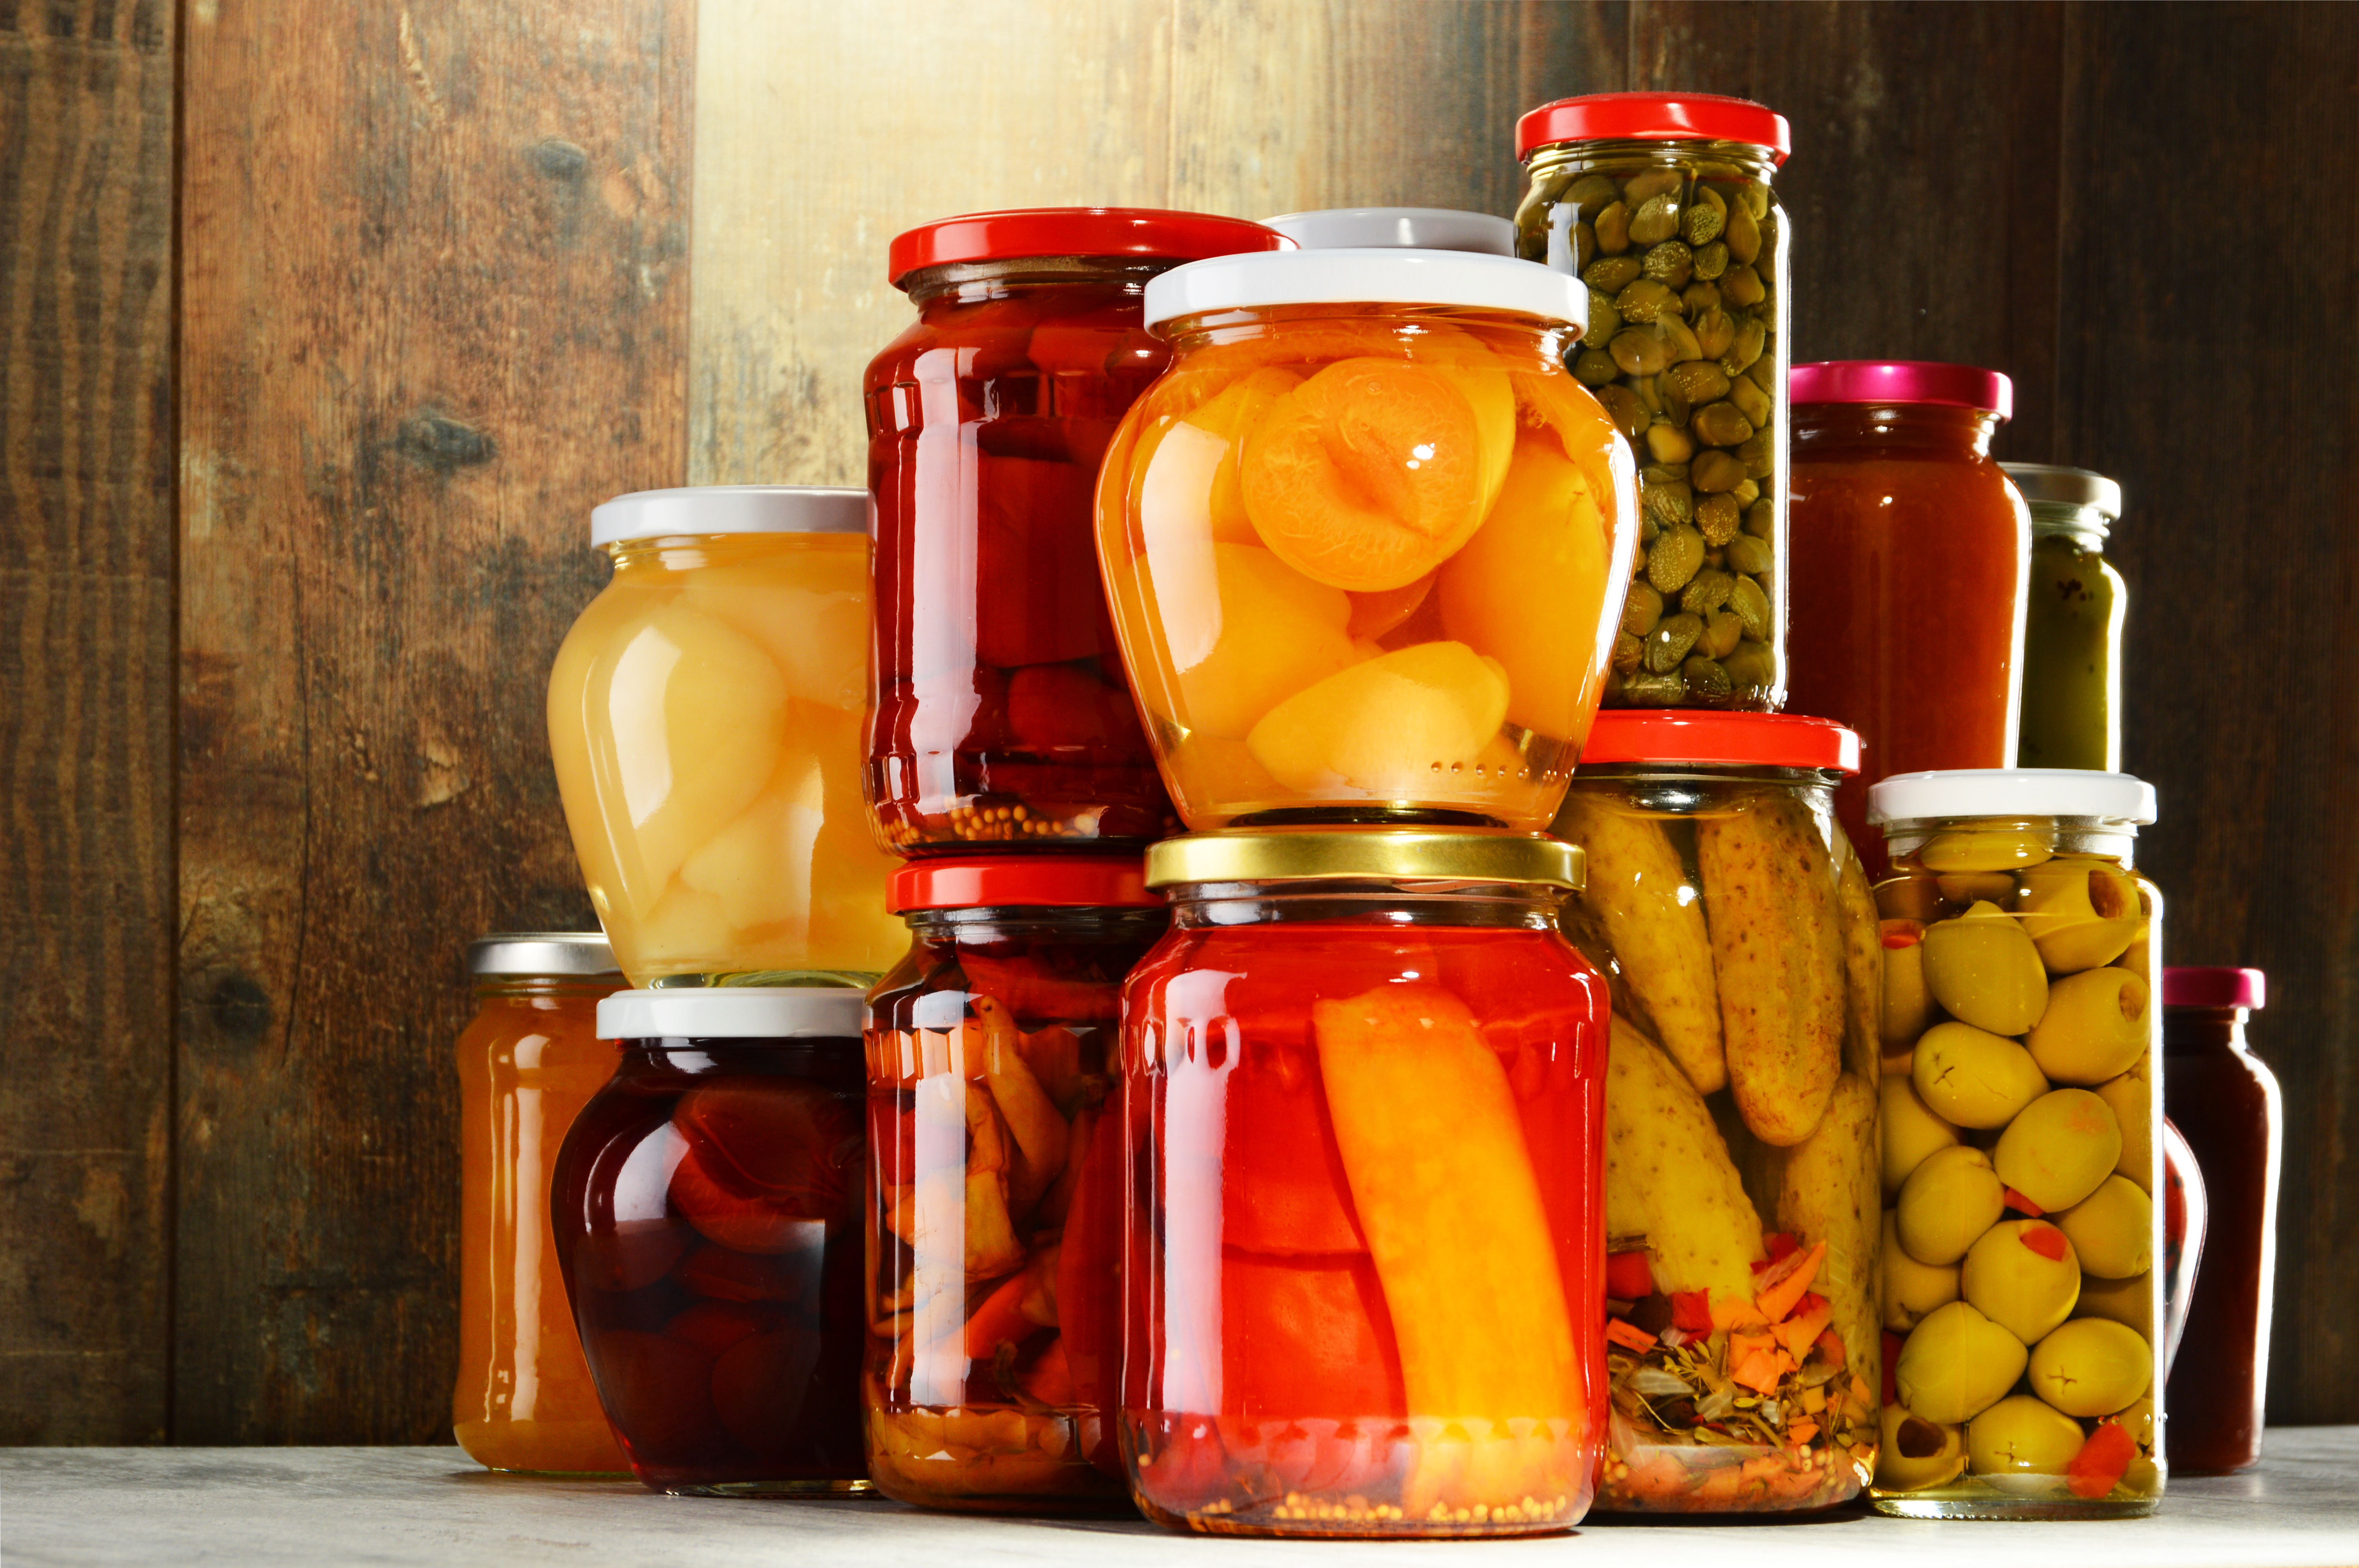 Various sizes and shapes of jars stacked on top of eachother, filled with fruits and vegetables.